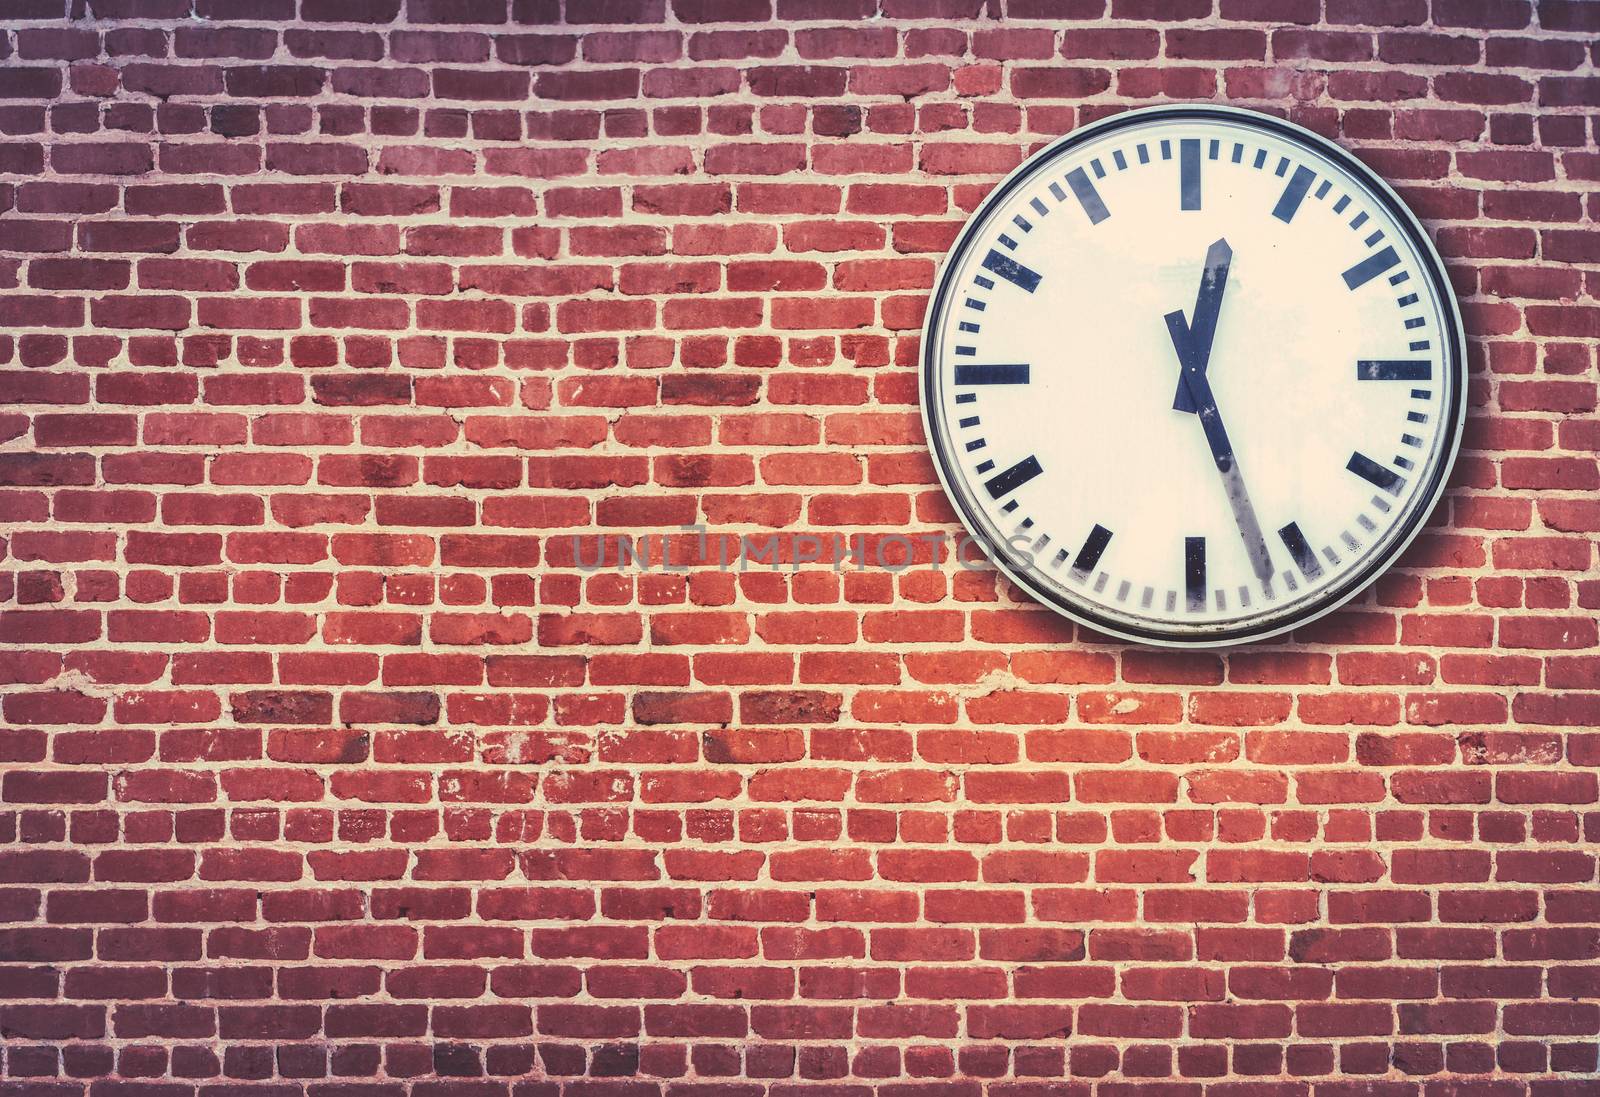 Retro Railway Style Clock Against A Red Brick Wall